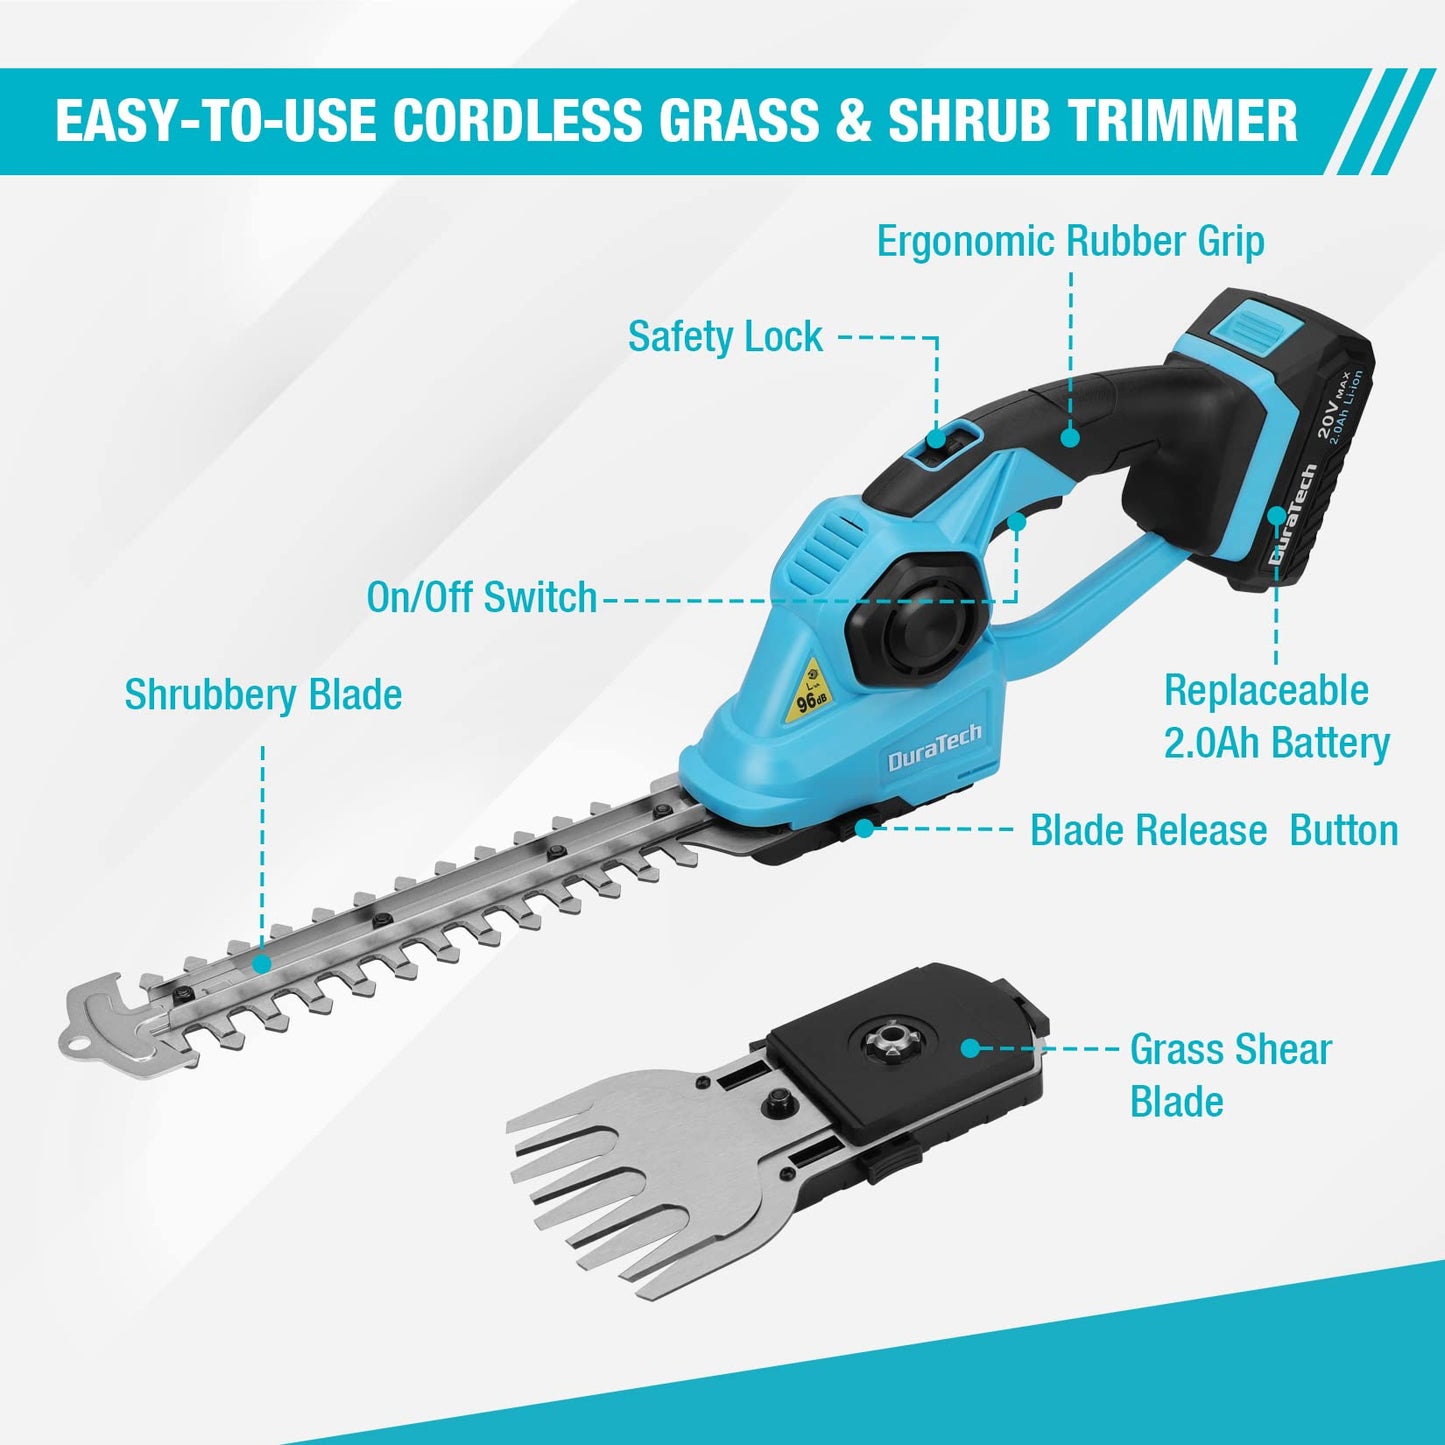 DURATECH Cordless Grass Shear & Shrubbery Trimmer, 2-in-1 20V Handheld Electric Hedge Trimmer & GrassTrimmer Included 2.0Ah Li-ion Battery, Quick Charger, Shrub Trimmer & Grass Cutter for Garden, Lawn